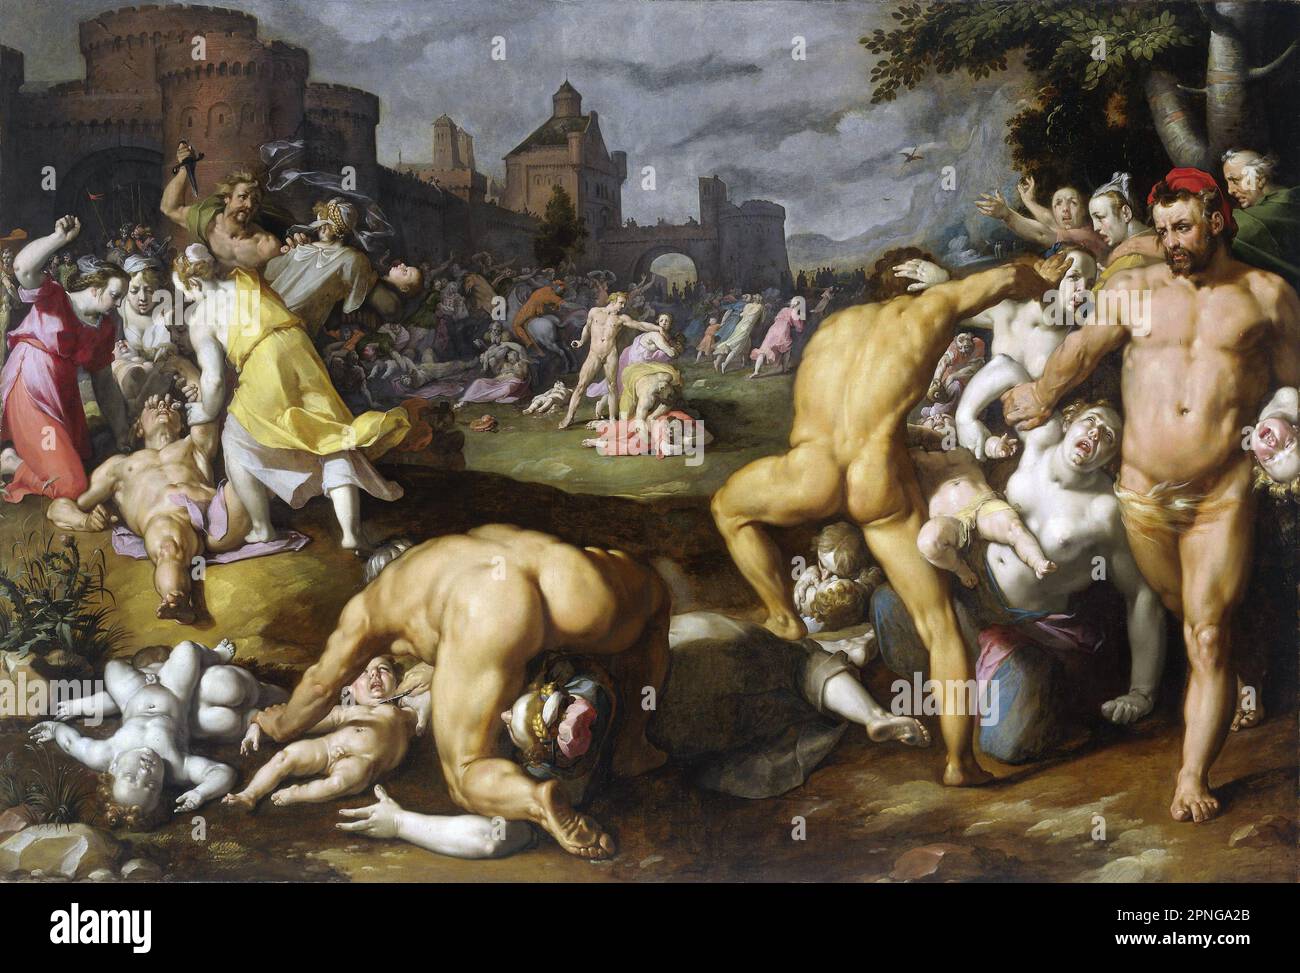 Palestine / Netherlands: 'Massacre of the Innocents'. Oil on canvas painting by Cornelis Van Haarlem (1562 - 11 November 1638), 1590.  Van Haarlem depicts a horrific scene from the Old Testament of the Christian Bible in this 16th century oil on canvas masterpiece.  King Herod has heard that a new King of the Jews has been born in Bethlehem. Unable to identify the Messiah, he orders his soldiers to kill every boy in Bethlehem aged two or under. According to the Hebrew Bible, Mary and Joseph had already fled to Egypt with their newborn, Jesus. They stayed in Egypt until after Herod's death. Stock Photo